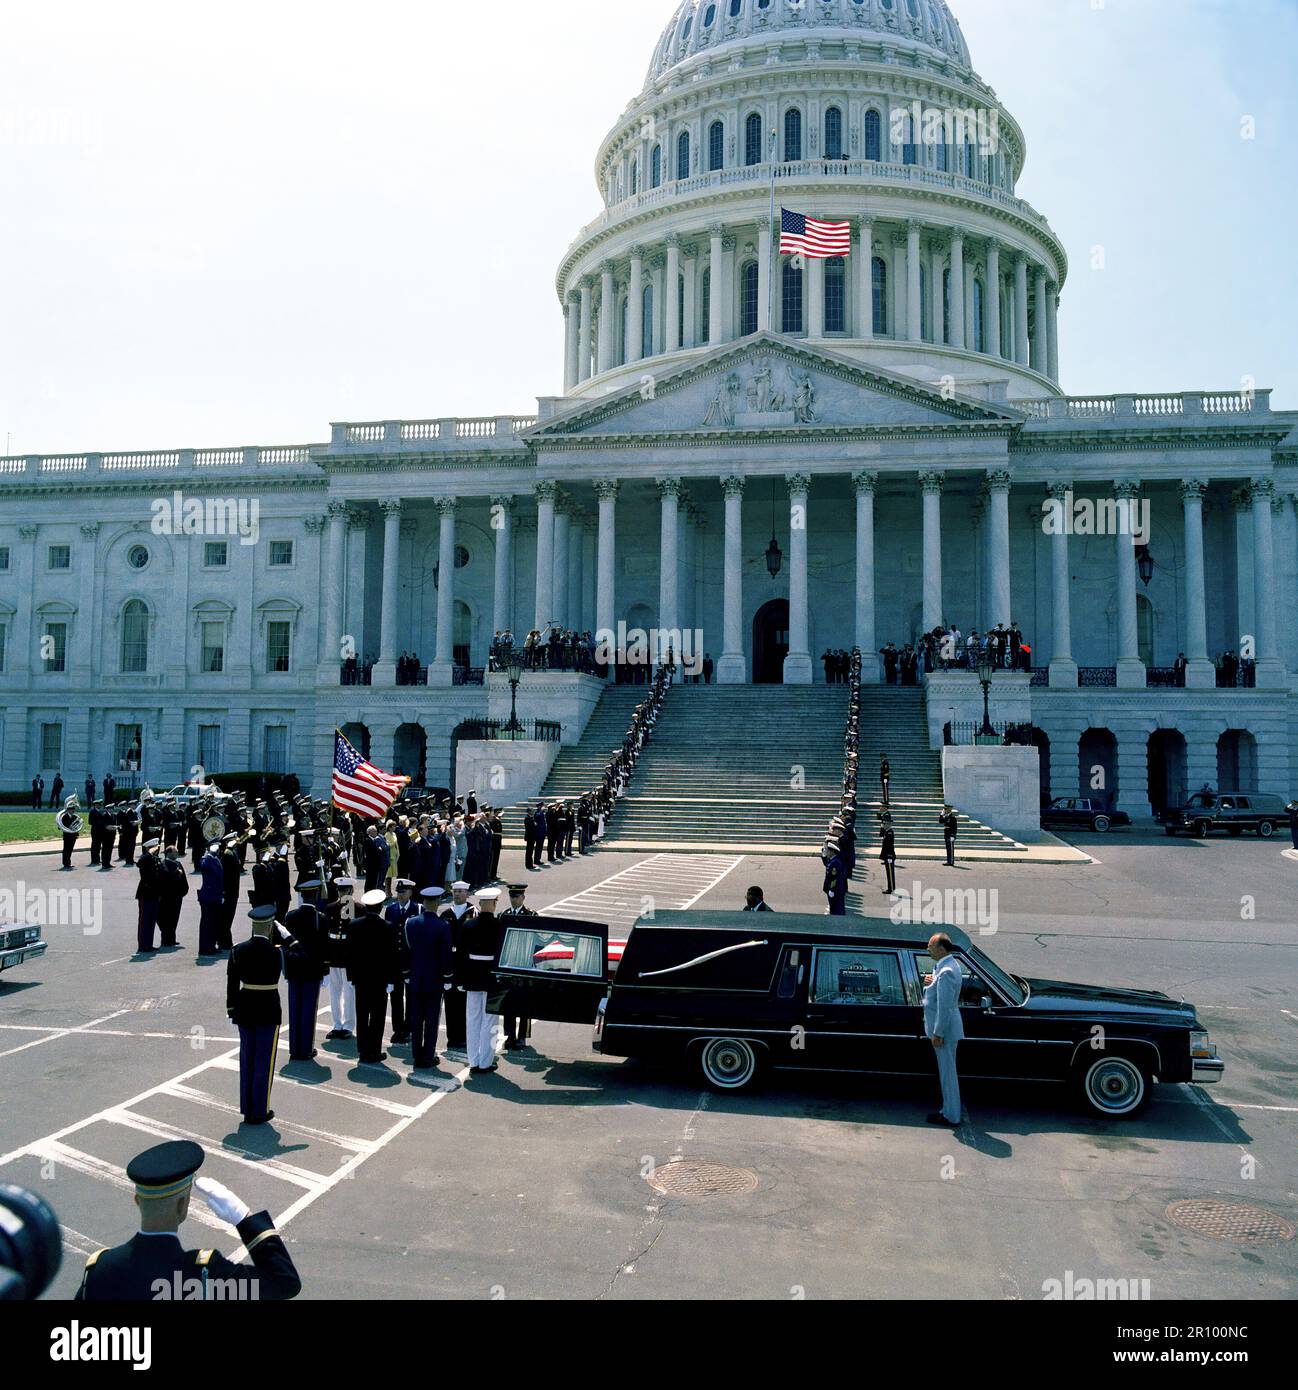 A joint services casket team removes the casket of the Unknown Serviceman of the Vietnam Era from a hearse parked outside the east entrance of the Capitol.  The casket will be carried past the color guard and joint services honor condon lining the steps of the Capitol and placed in the rotunda, where the Unknown will lie in state until Memorial Day. Stock Photo